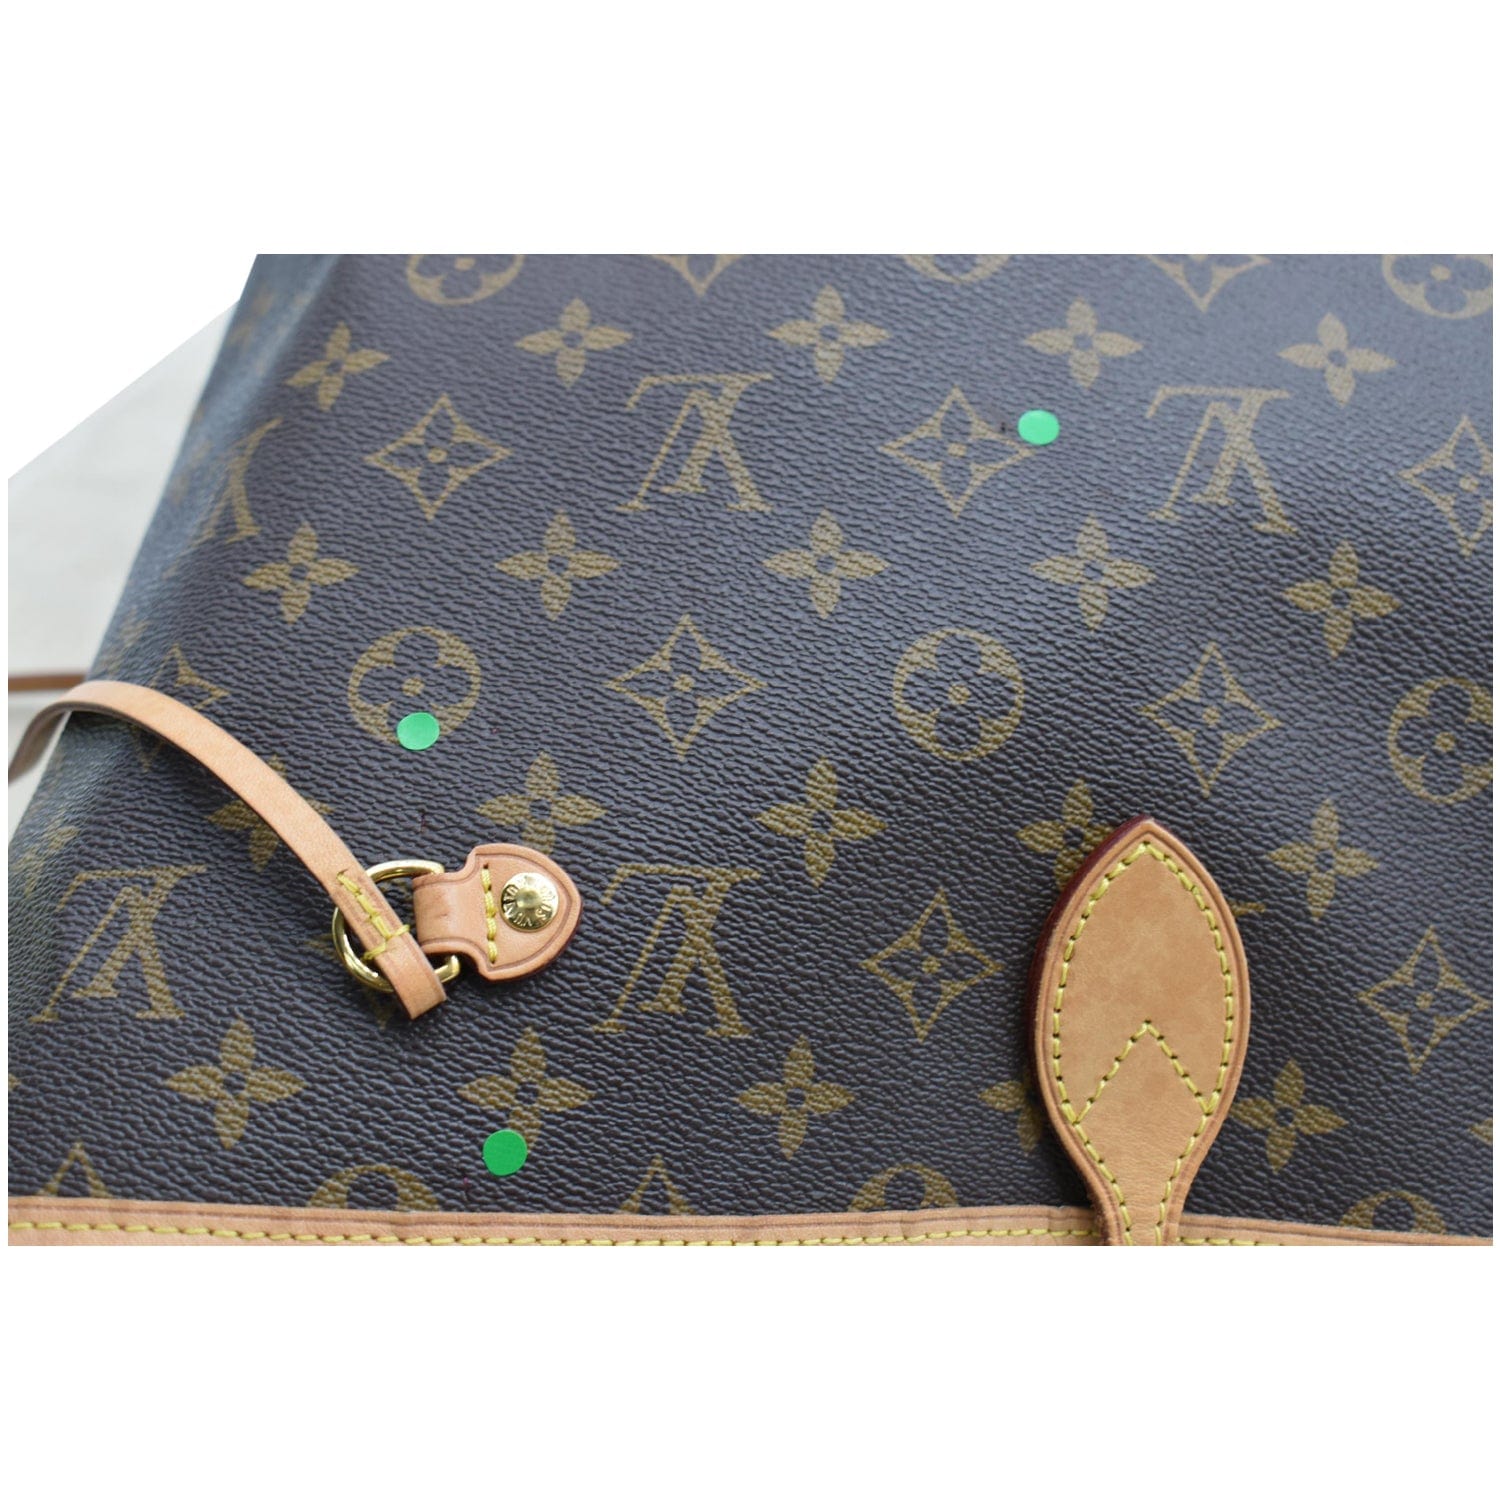 Guaranteed AuthenticLouis Vuitton Neverfull Tote GM Beige Grey